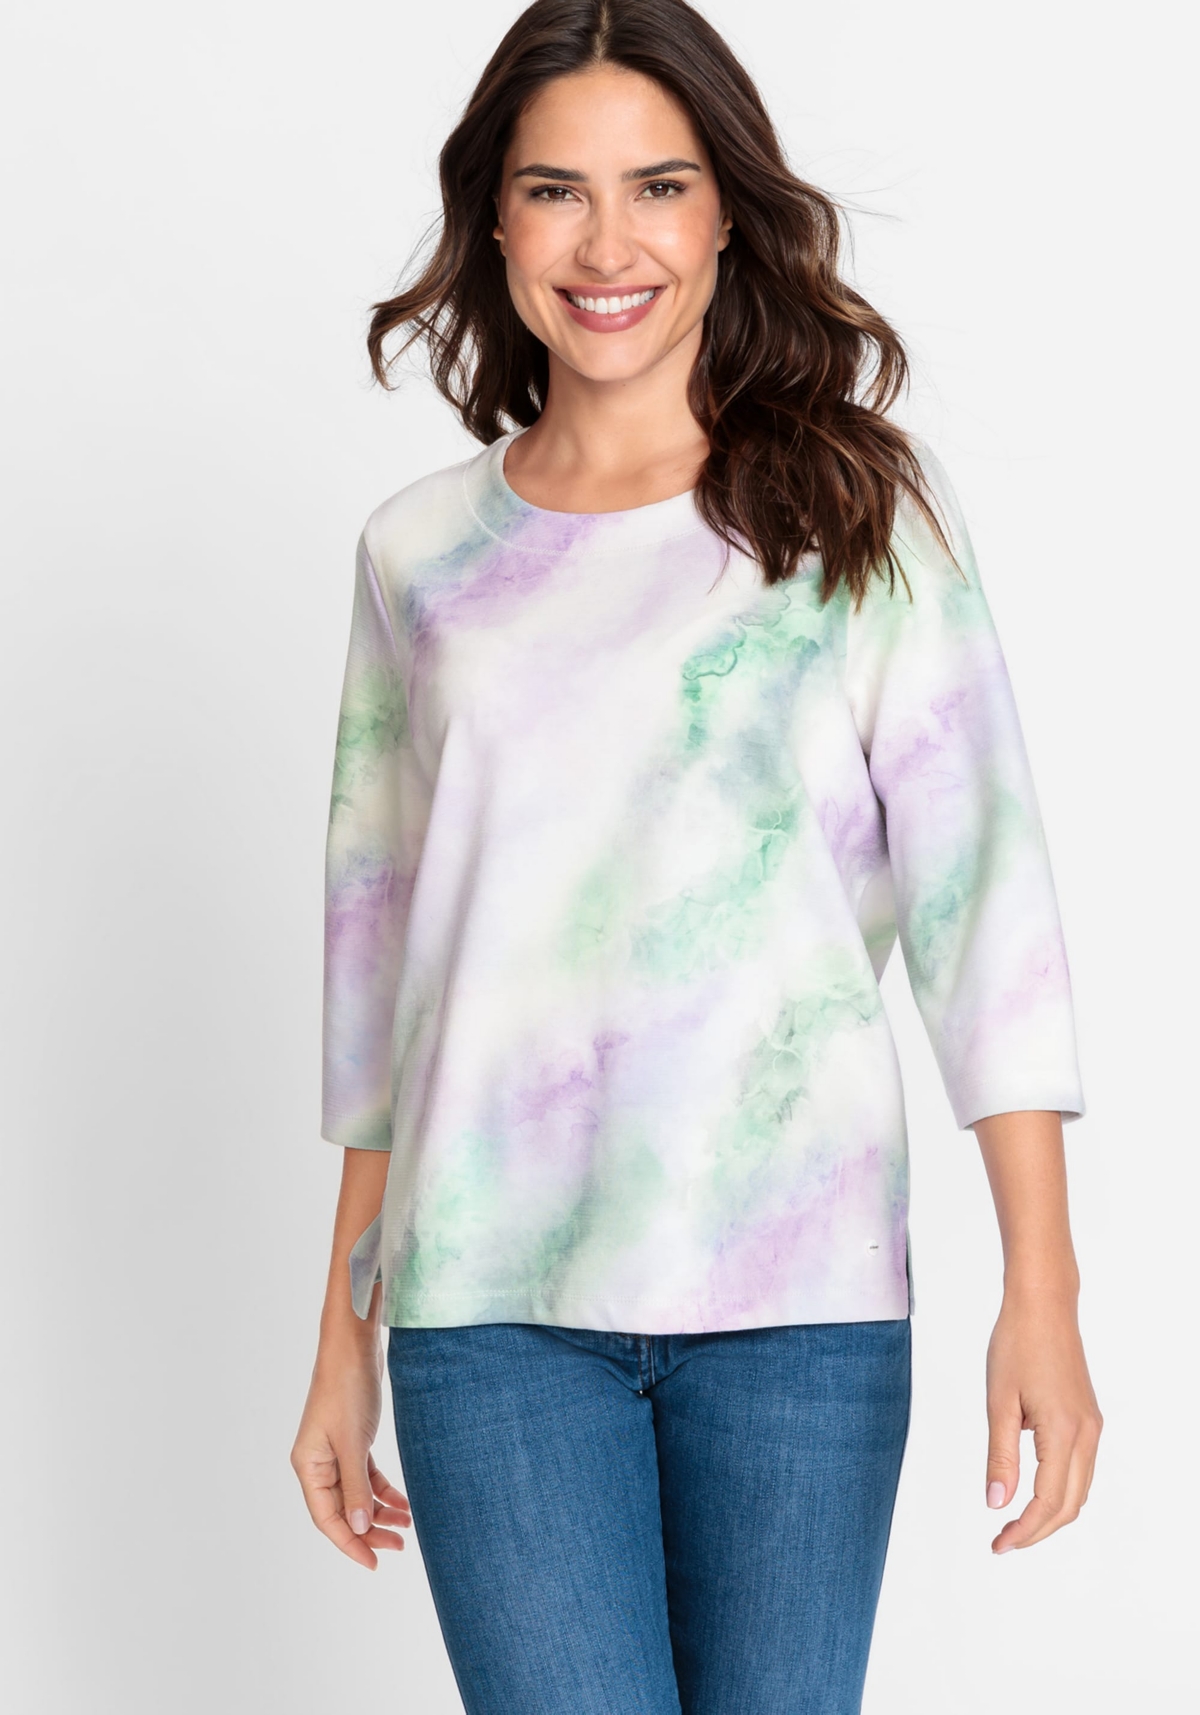 Women's 3/4 Sleeve Watercolor Jersey Top - Soft lilac